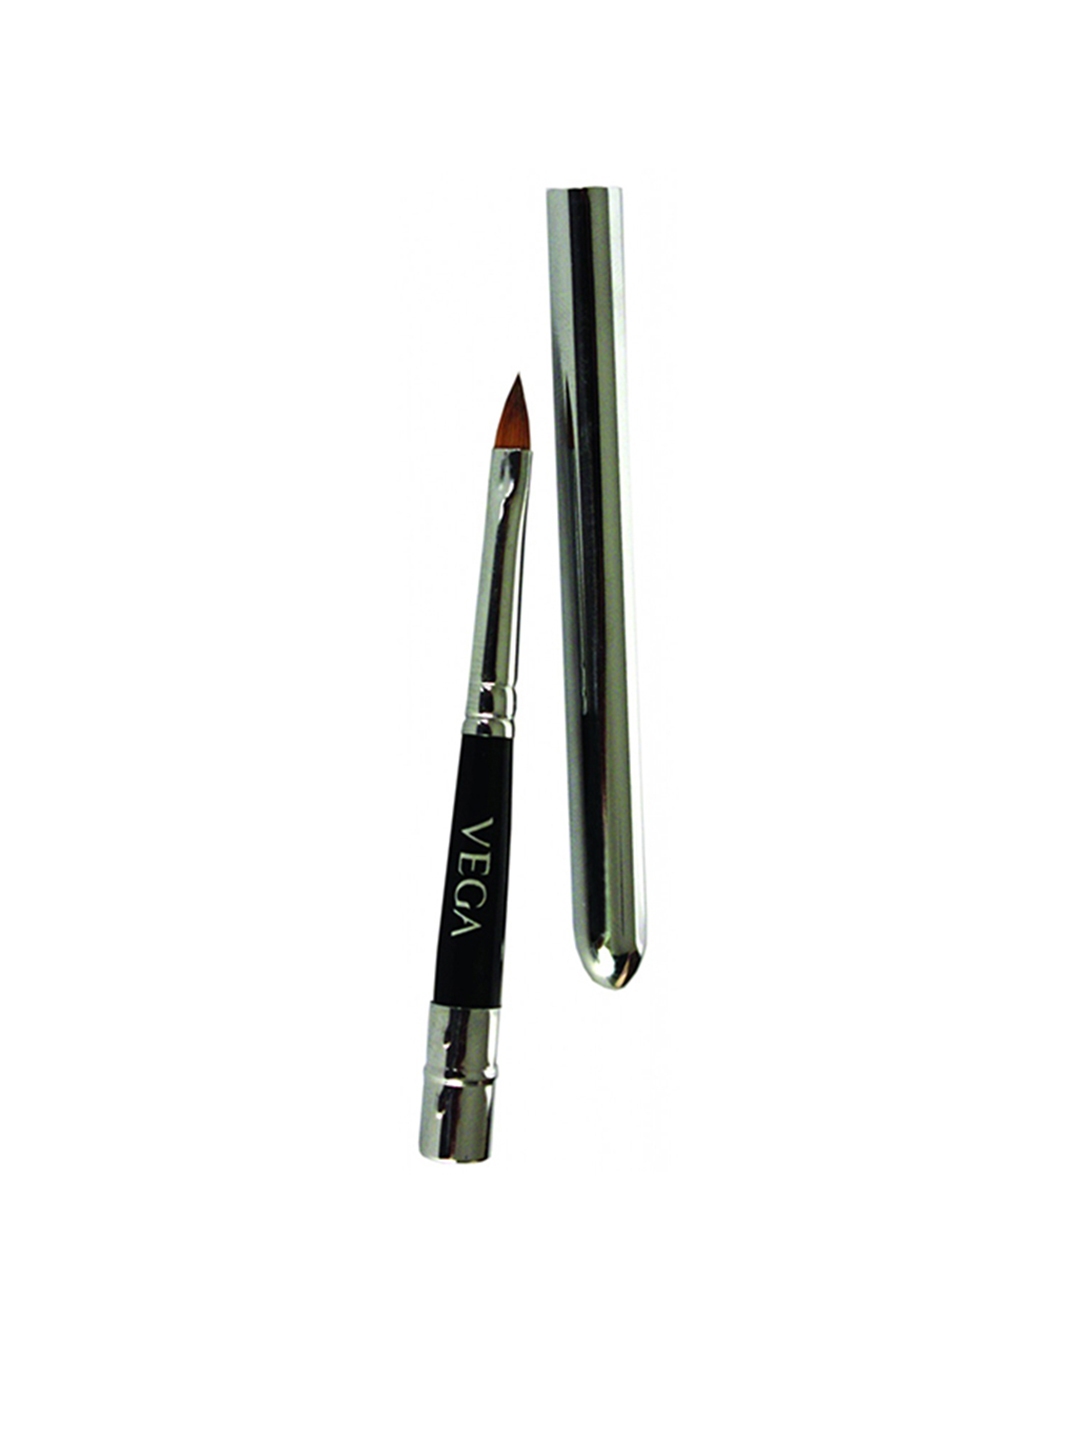 VEGA Professional Fine Liner Brush (VPPMB-25) At Nykaa, Best Beauty Products Online